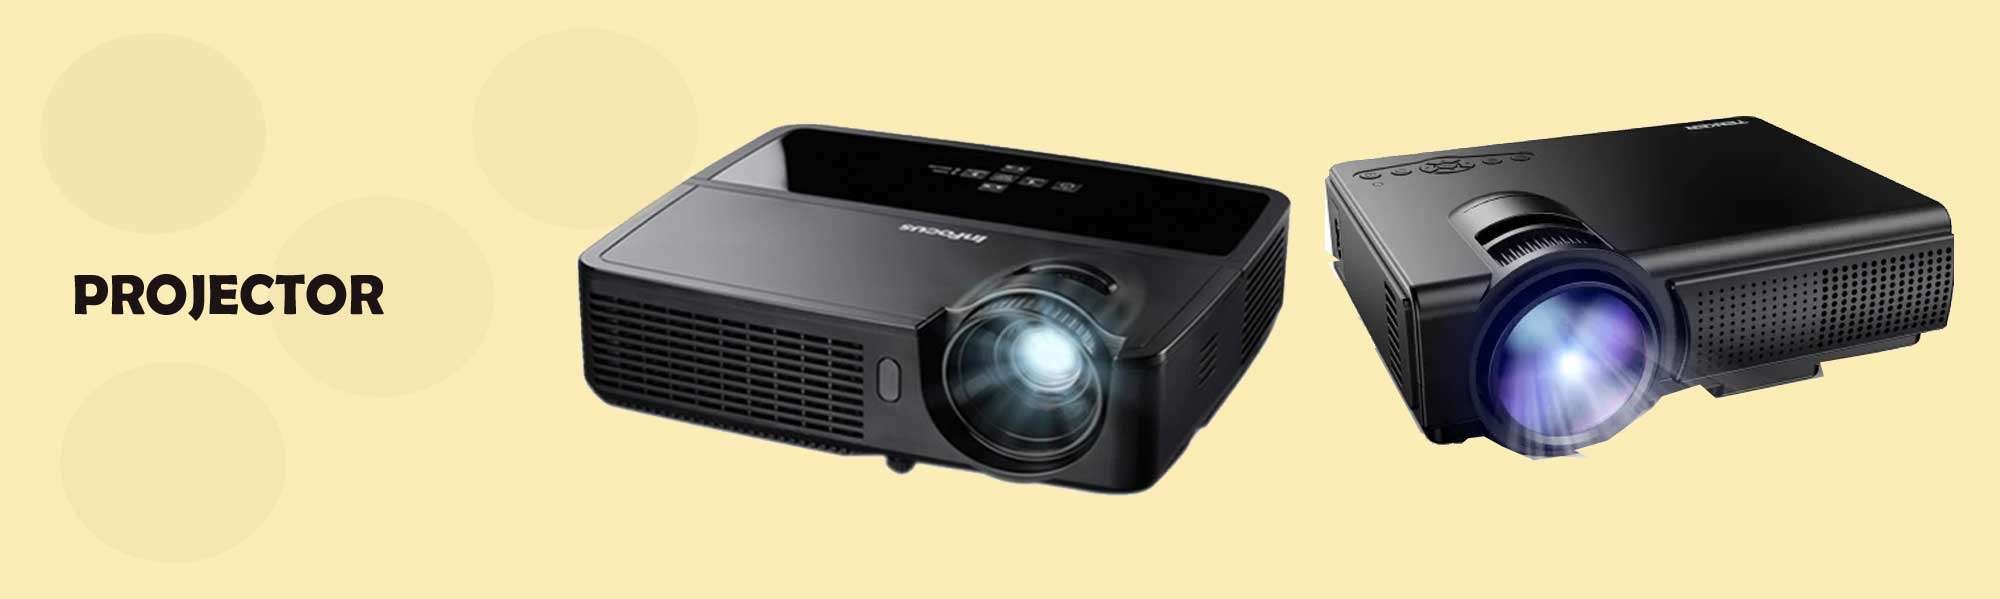 Casio Projector on Rent